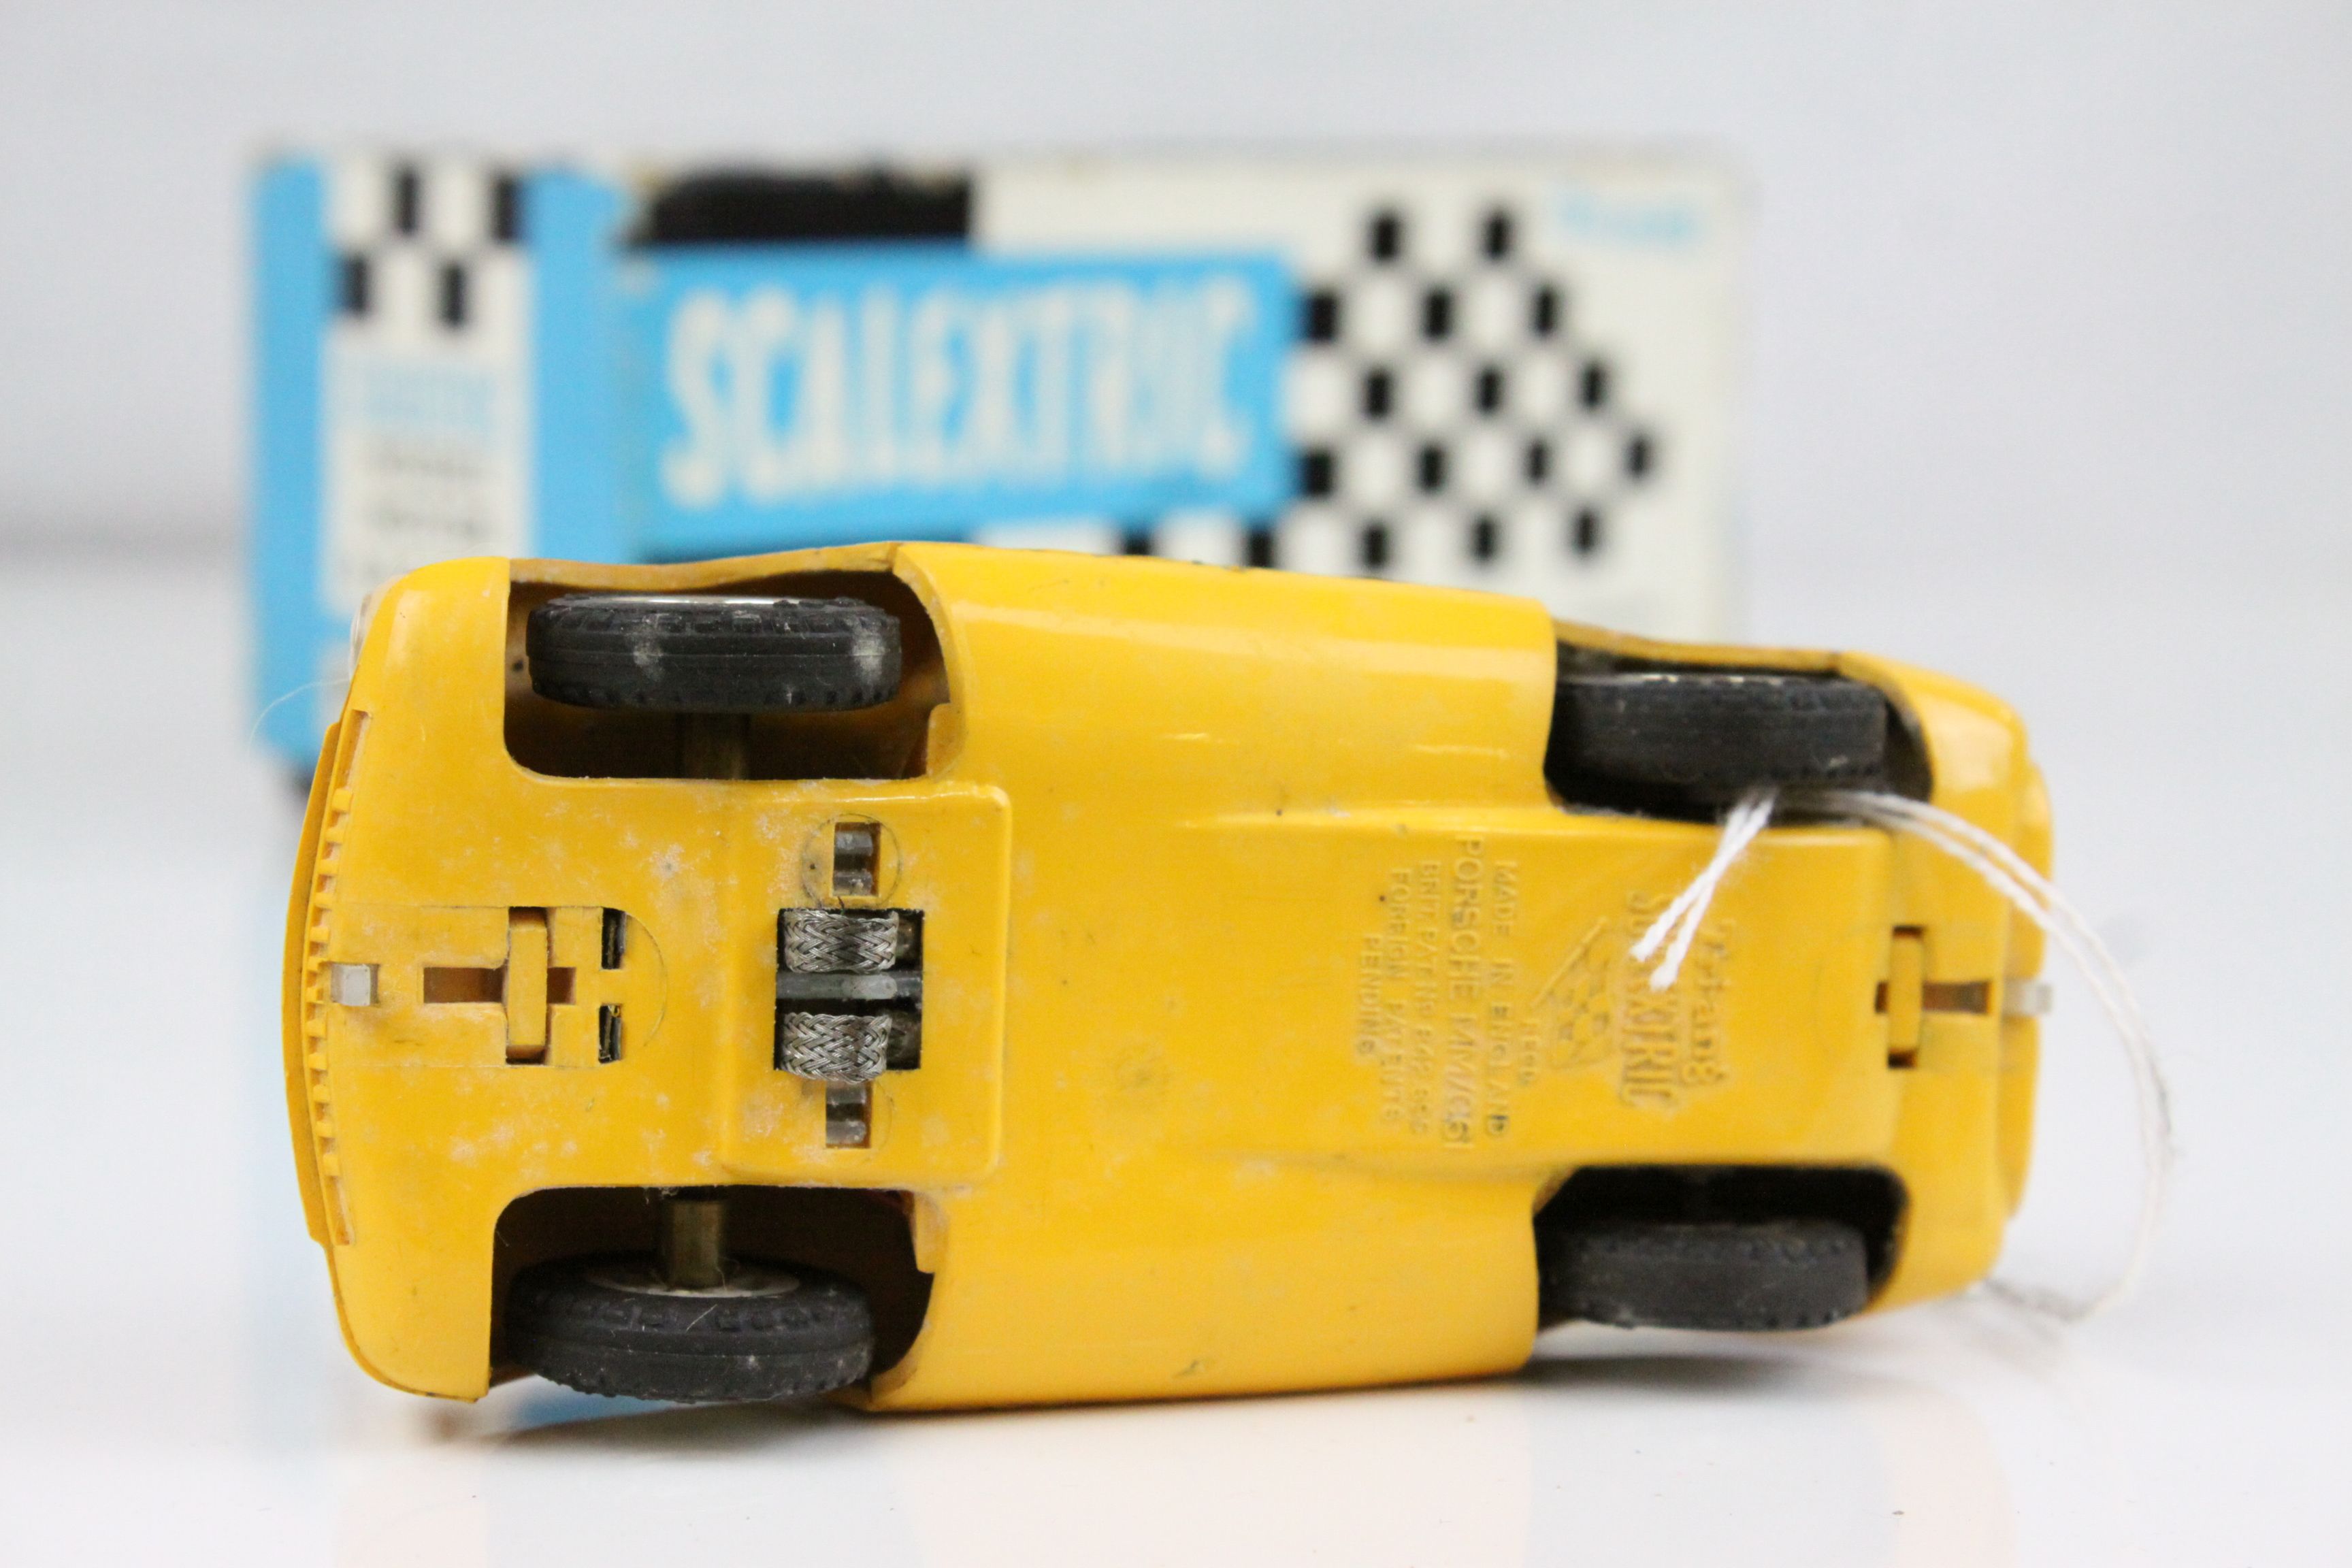 Boxed Triang Scalextric MM C61 Porsche slot car in yellow, driver with red helmet, race number 13, - Image 6 of 11